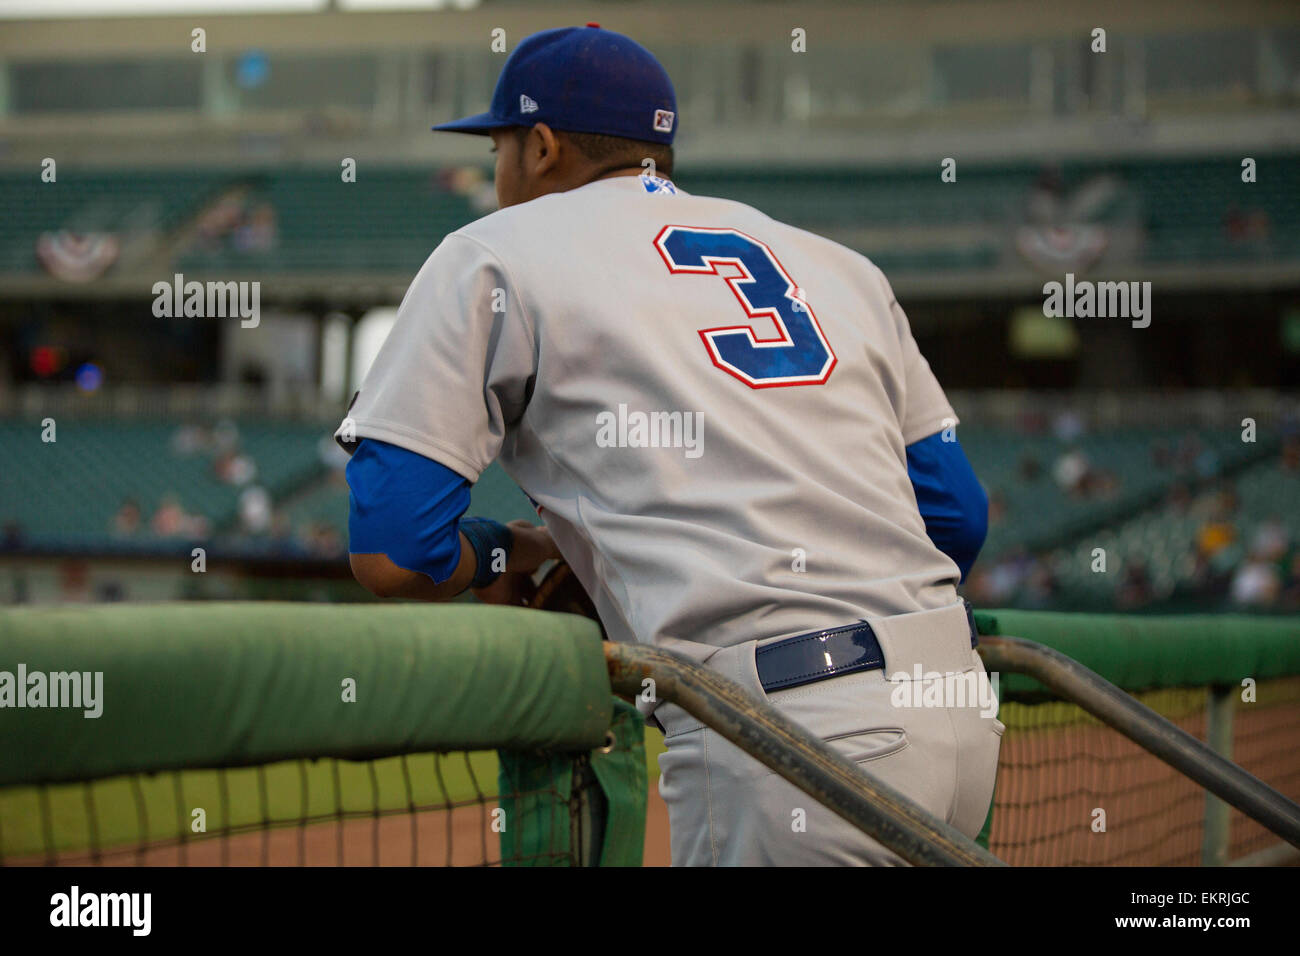 New Orleans, LA, USA. 13th Apr, 2015. Iowa Cubs shortstop Addison Russell (3) takes the field during the game between Iowa Cubs and New Orleans Zephyrs at Zephyr Field in New Orleans, LA. Credit:  csm/Alamy Live News Stock Photo